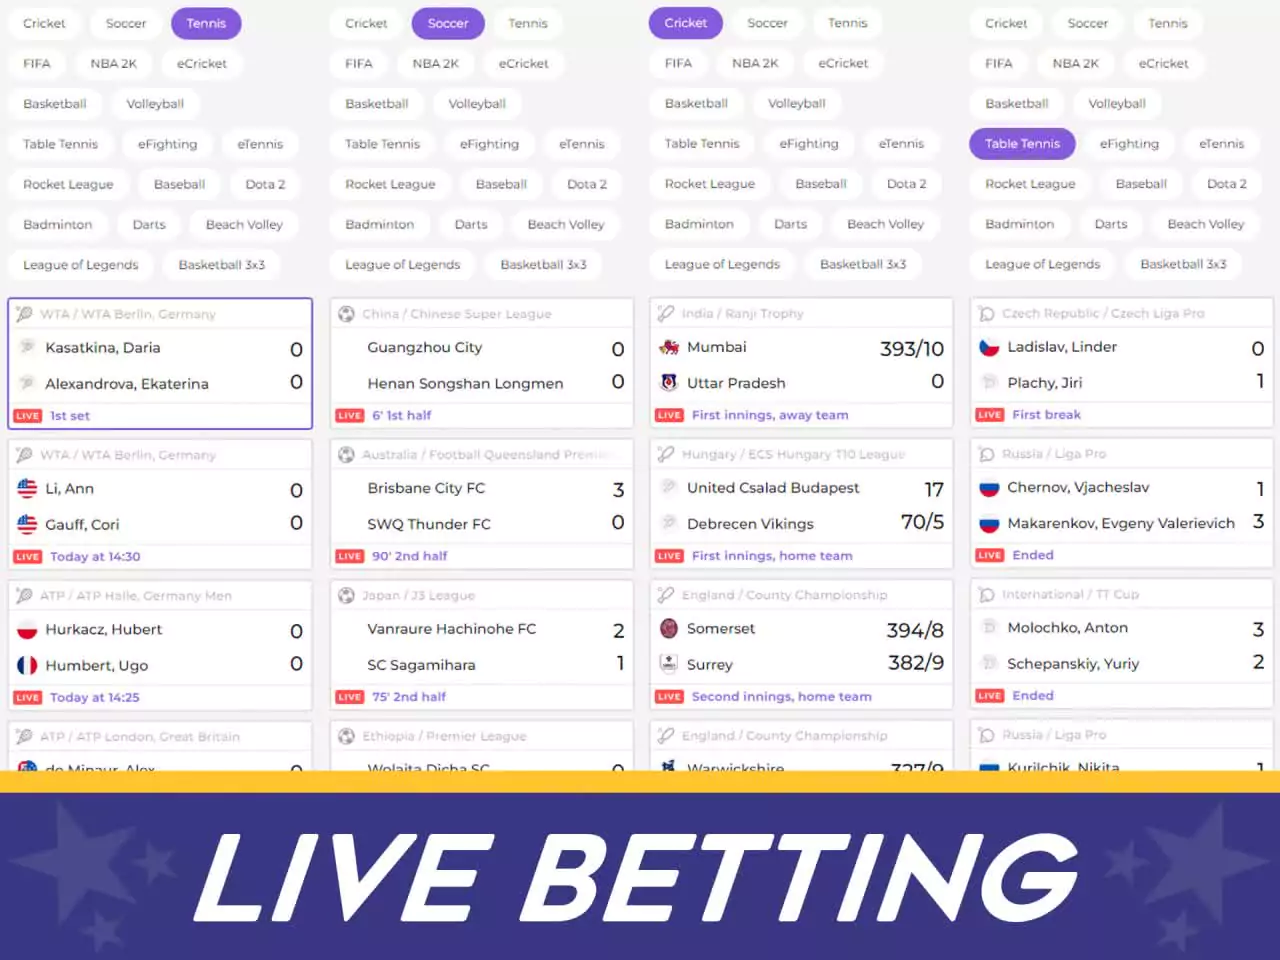 Bilbet offers match streamings and betting during the matches.